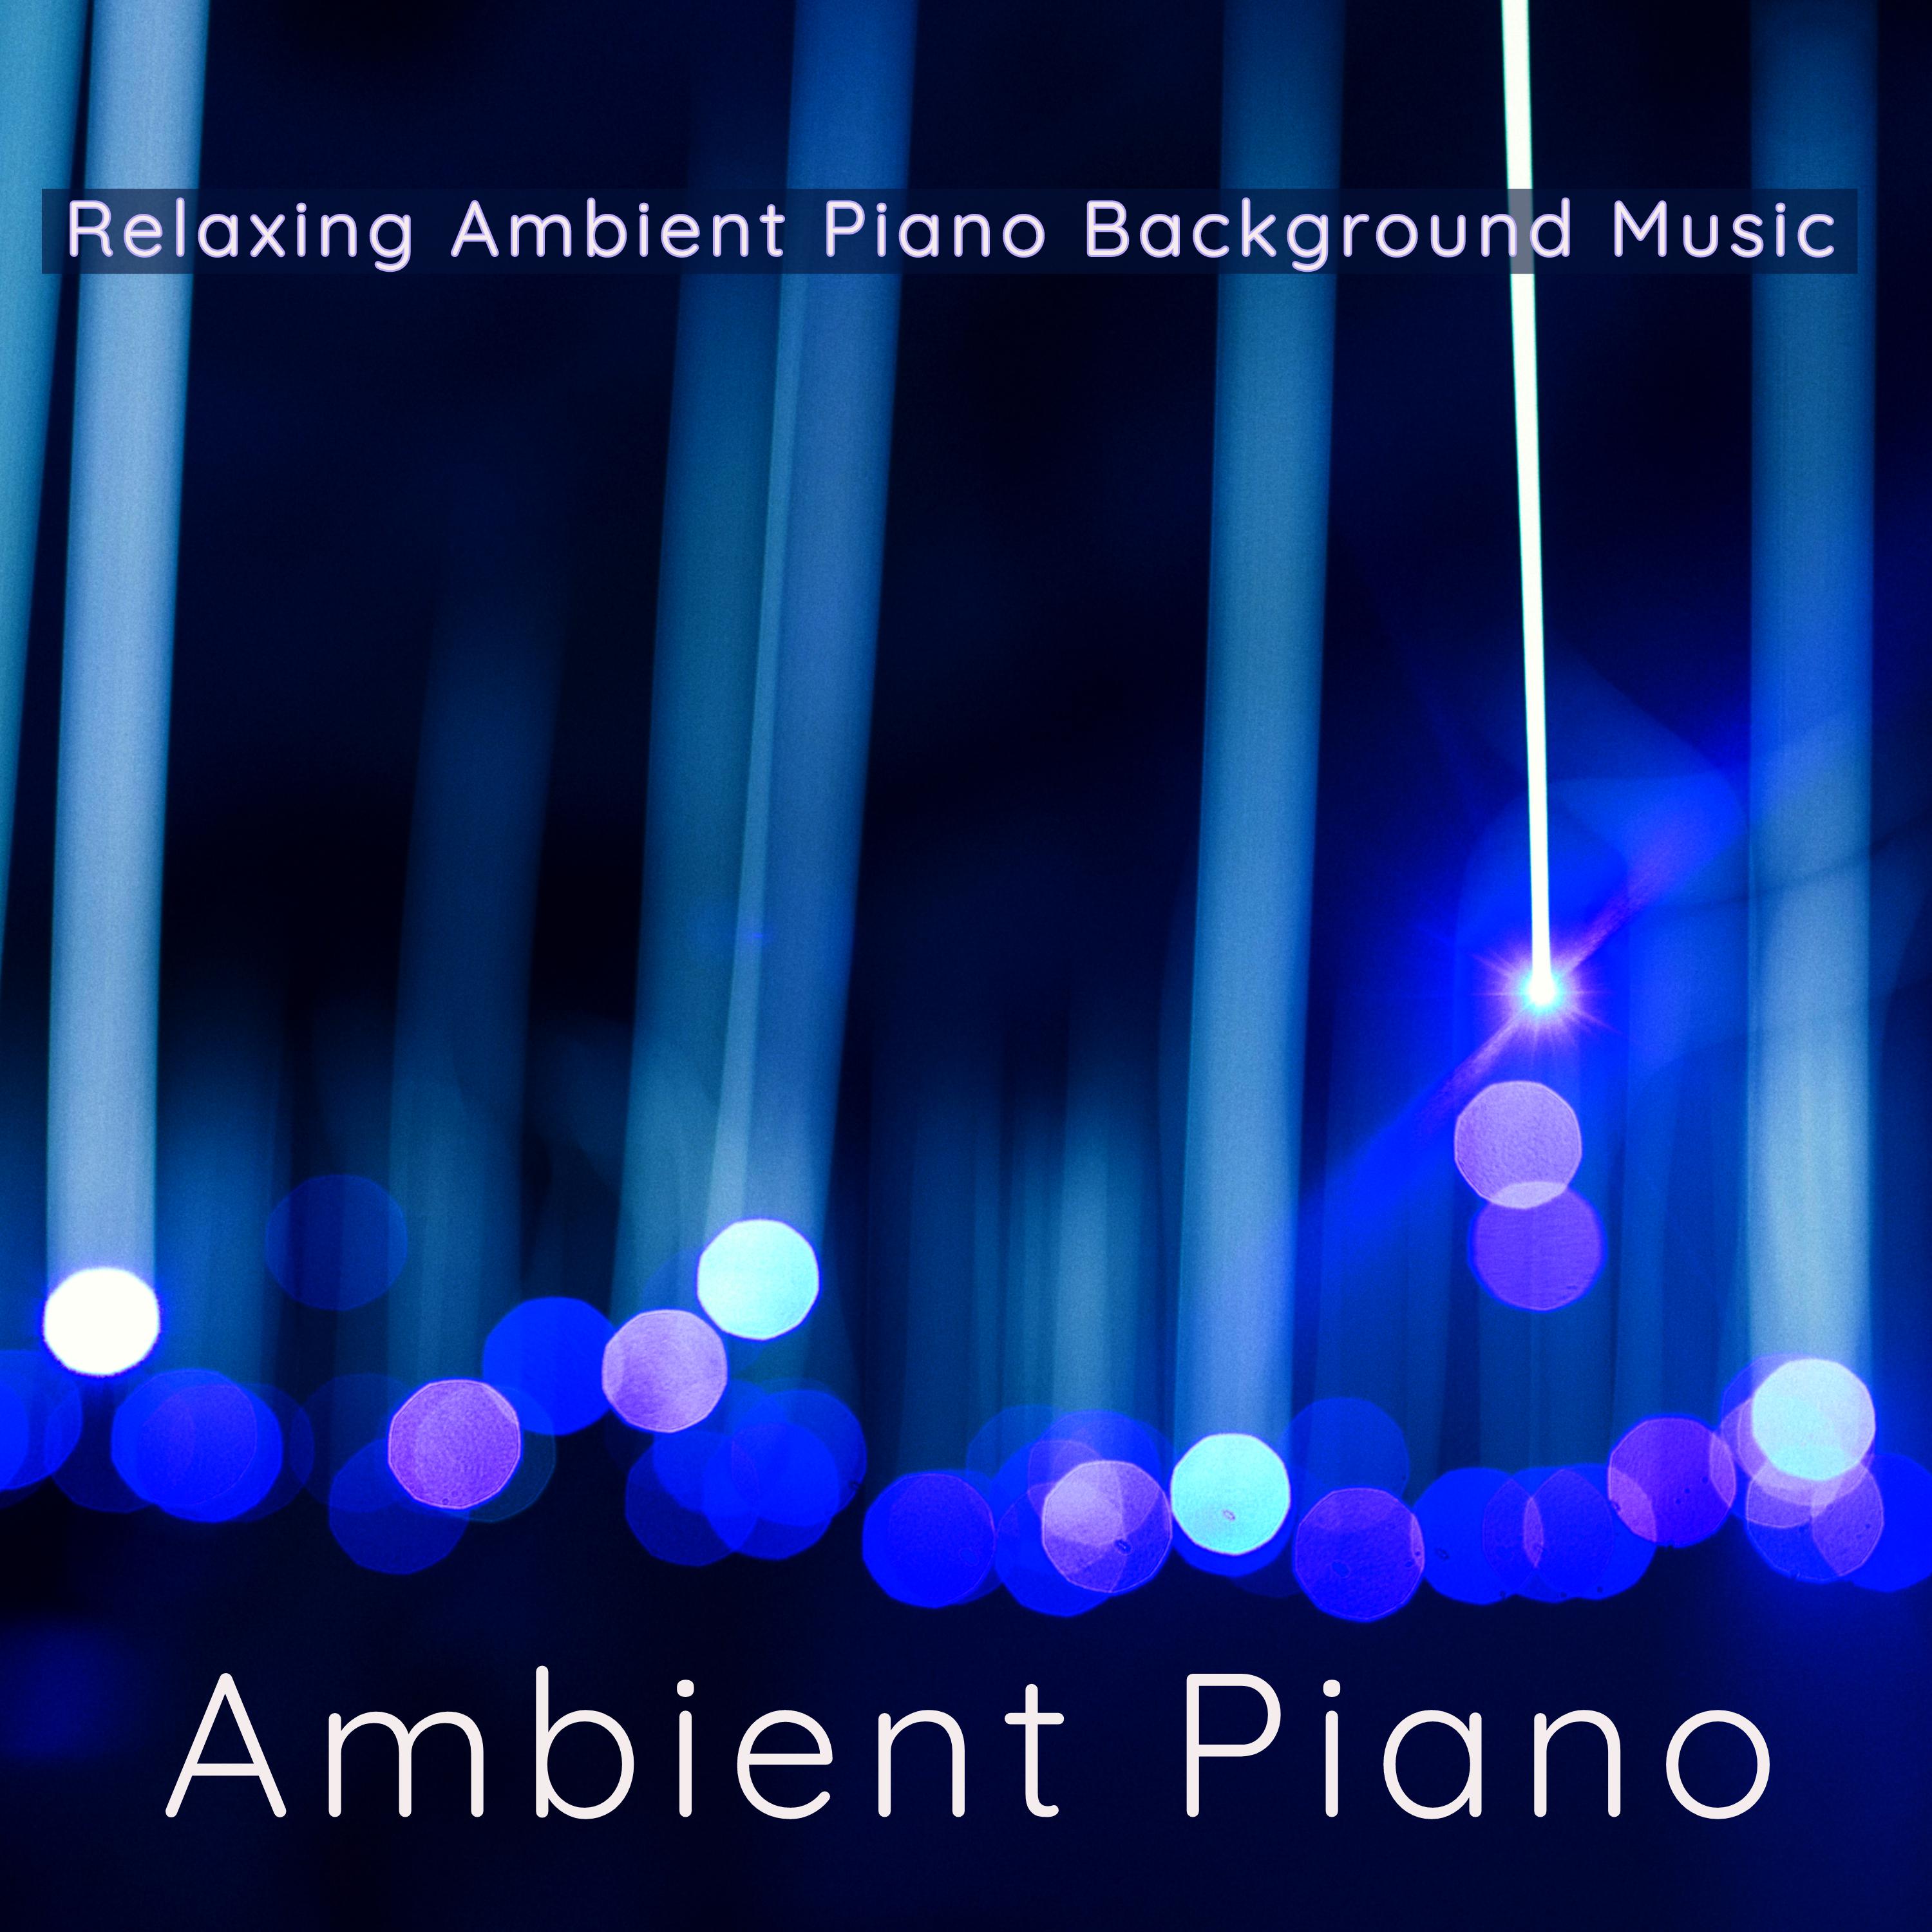 Ambient Piano  Relaxing Ambient Piano Background Music